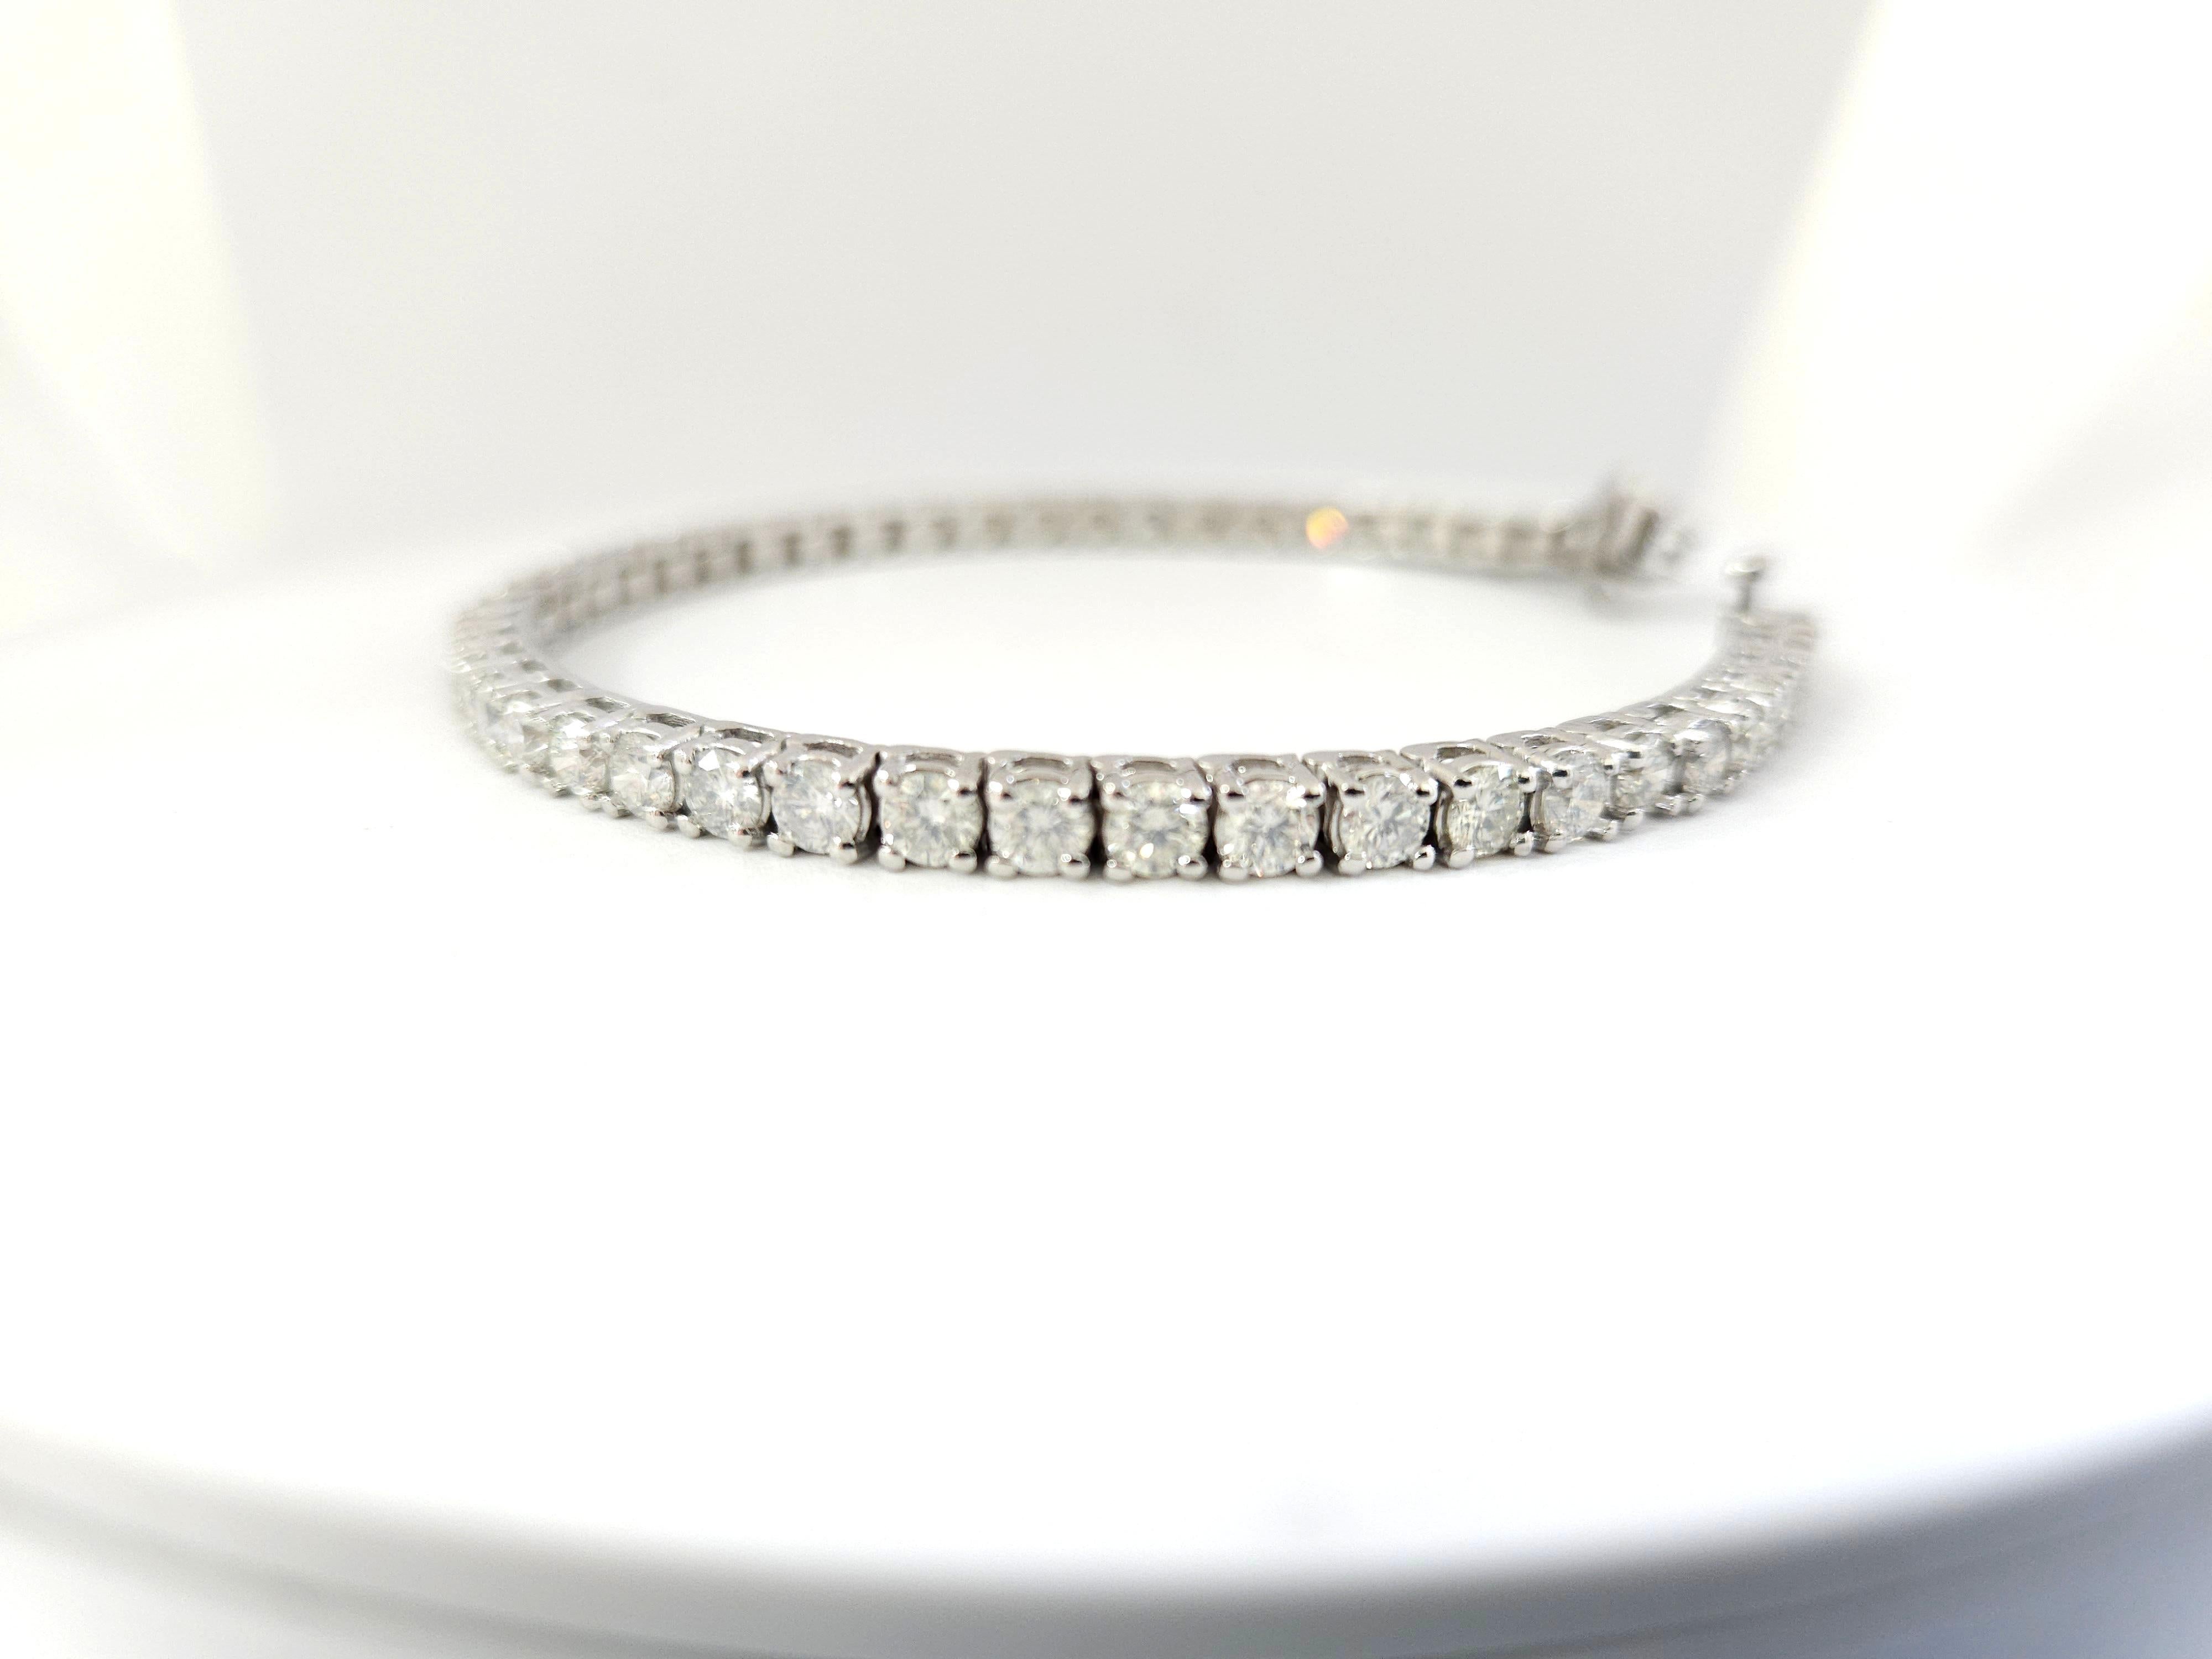 7.12 Carat Round Brilliant Cut Diamond Tennis Bracelet 14 Karat White Gold In New Condition For Sale In Great Neck, NY